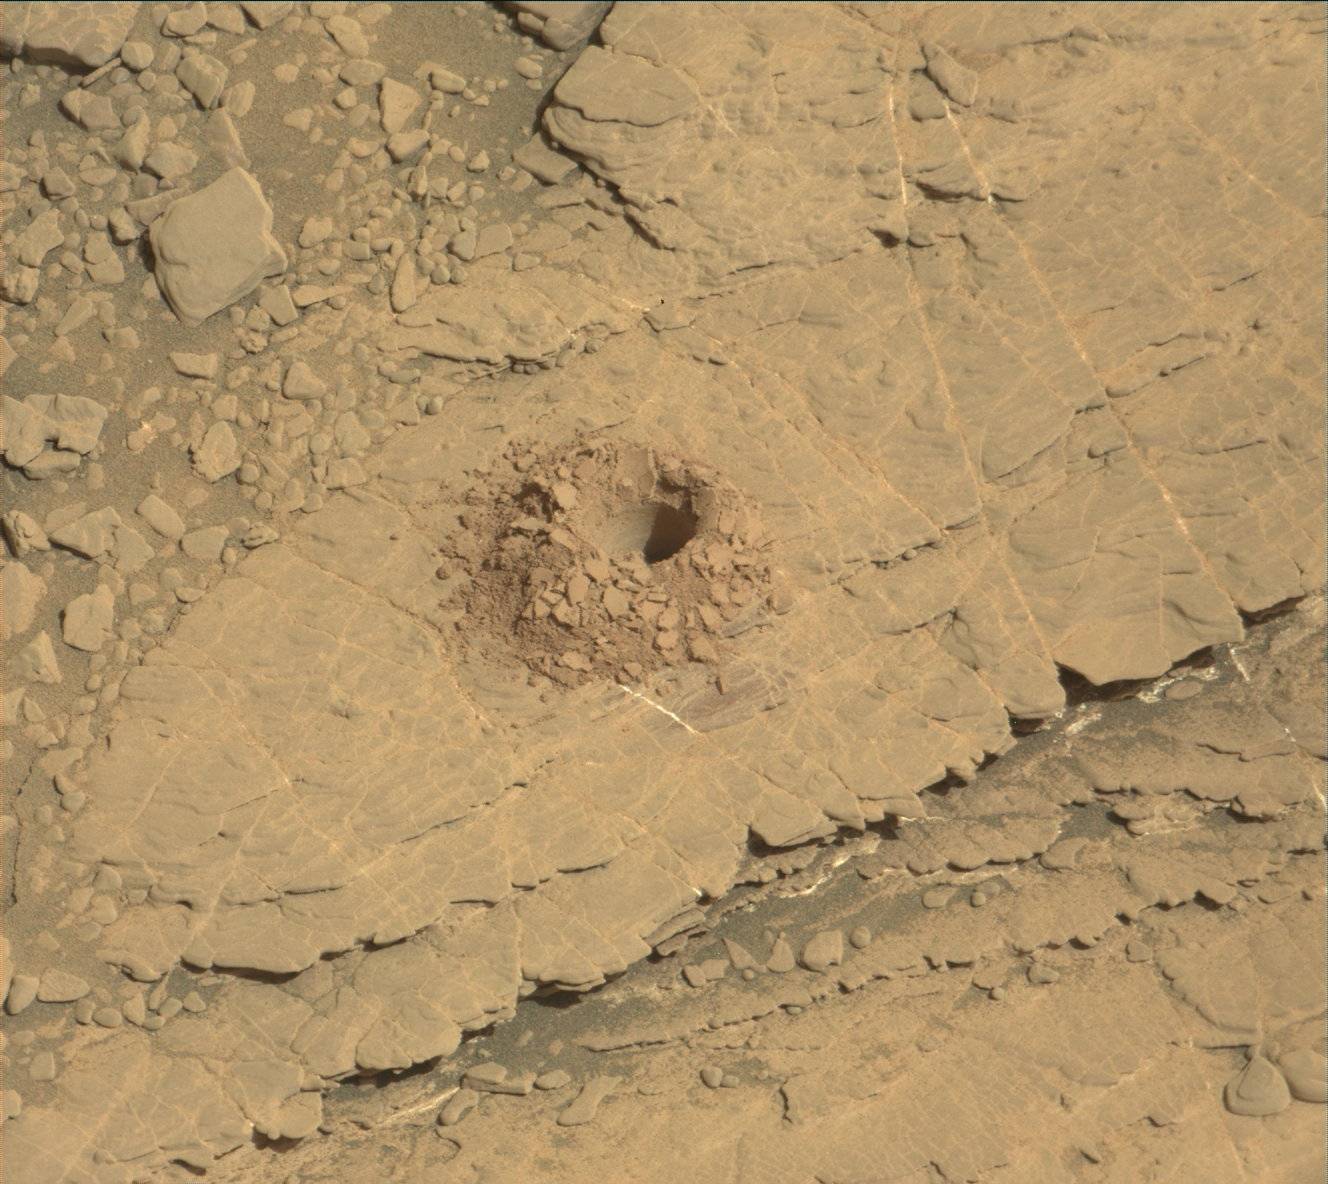 Sol 2488: Success on the 22nd Drill Hole; Happy Landing Day--On to Year 8!